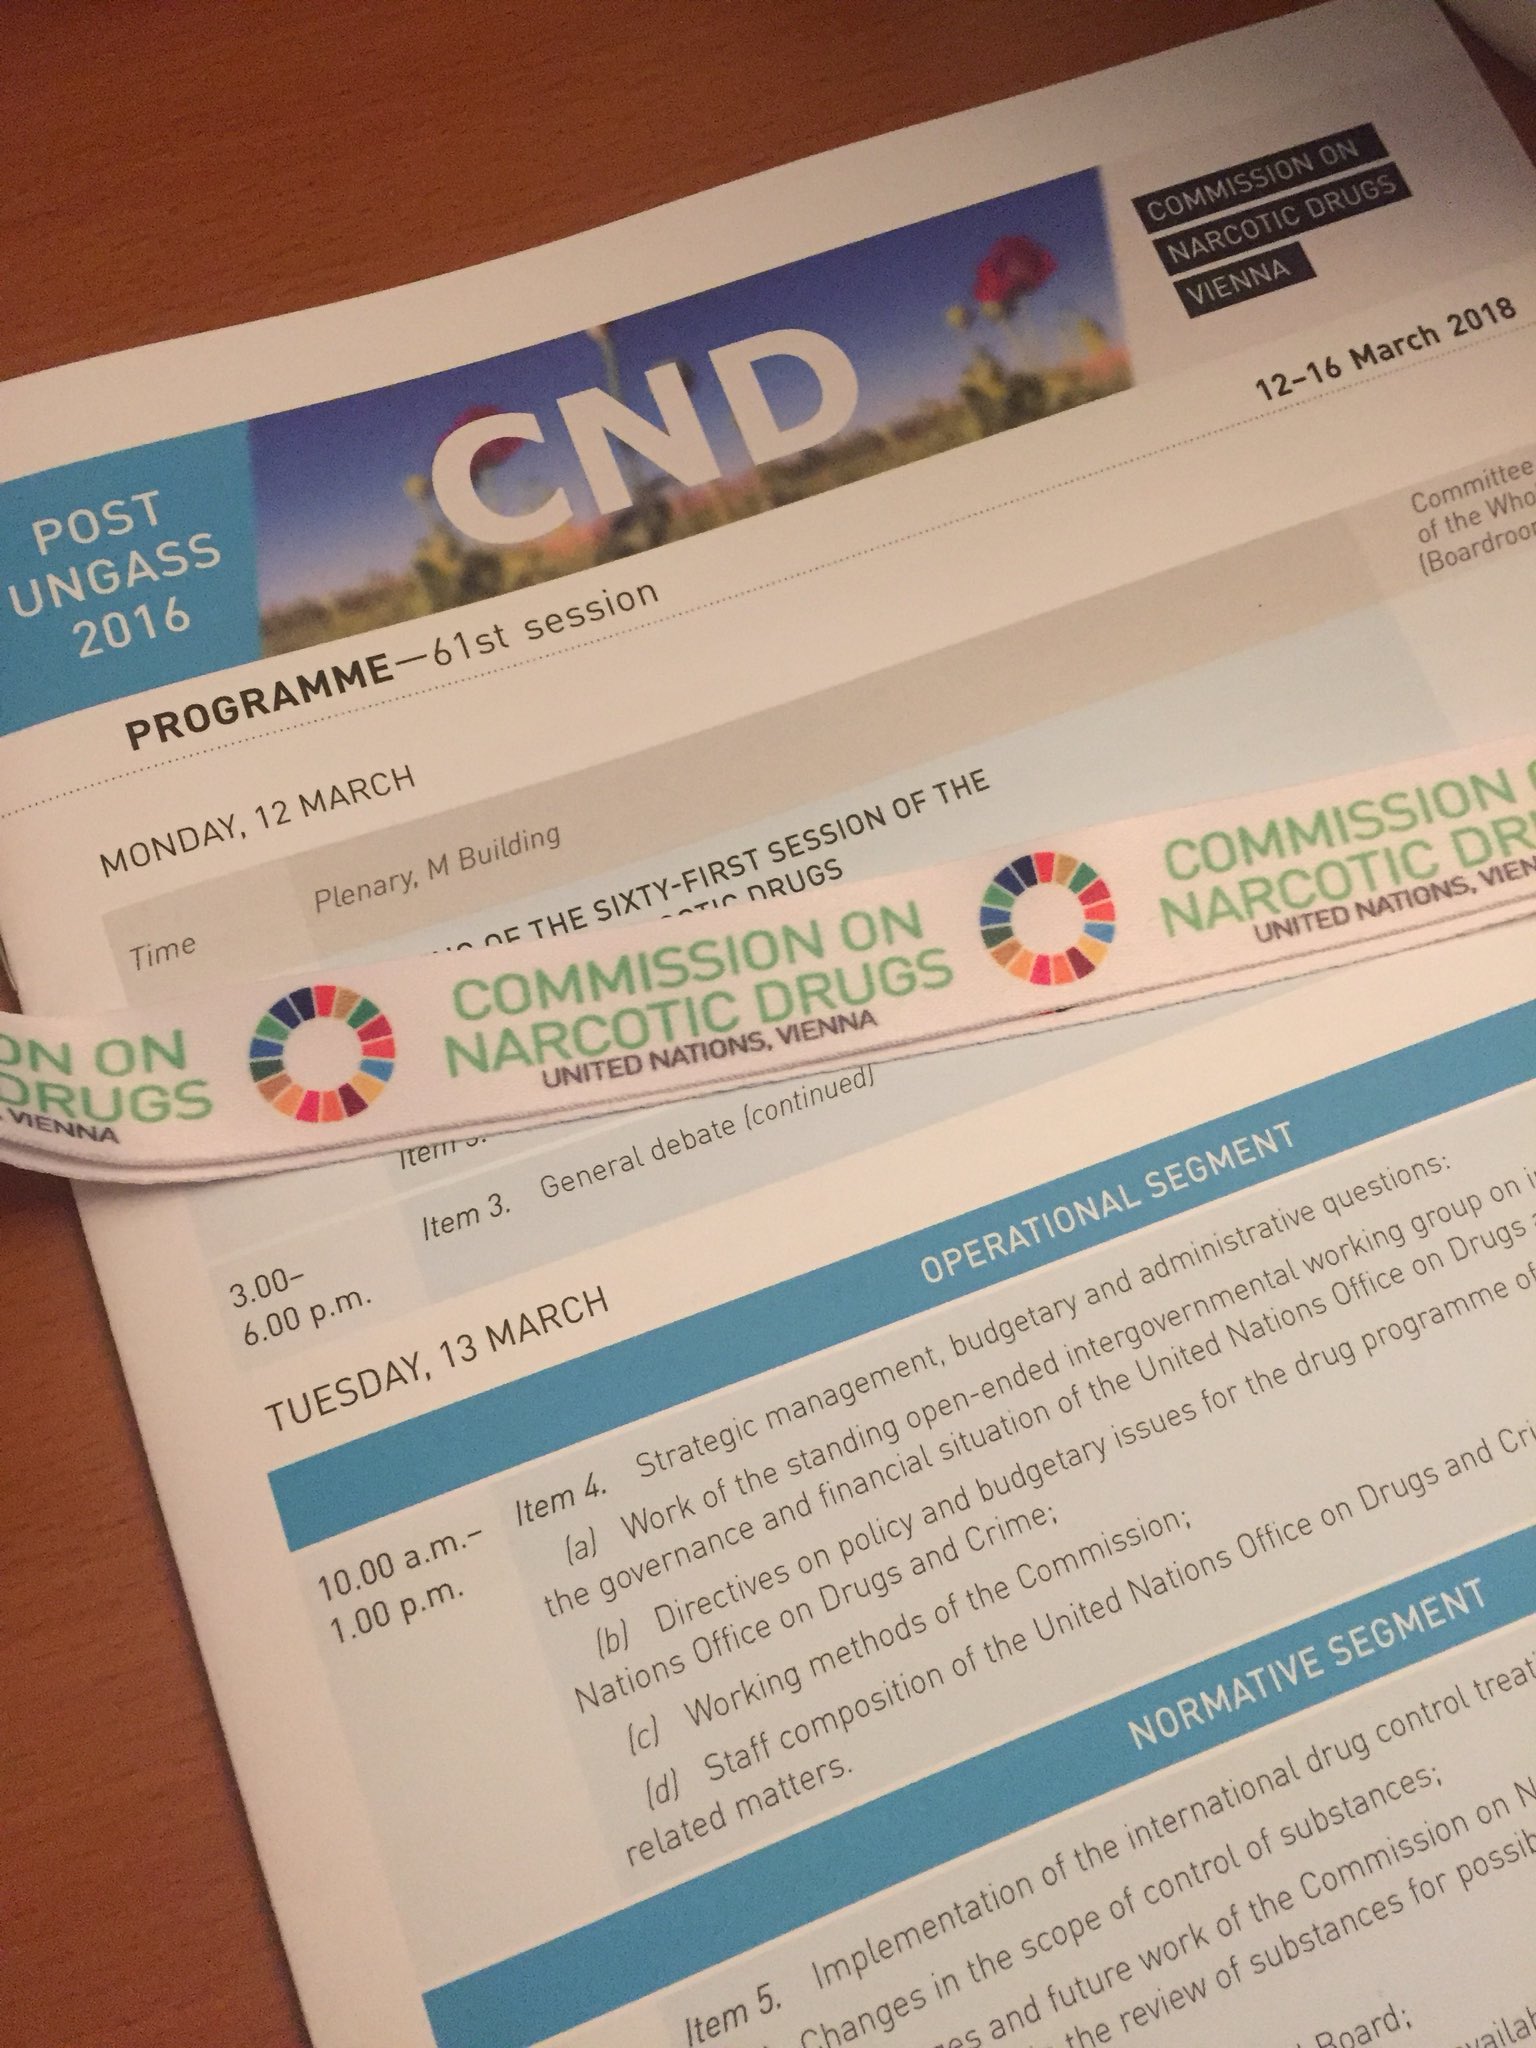 Two intense days at the CND